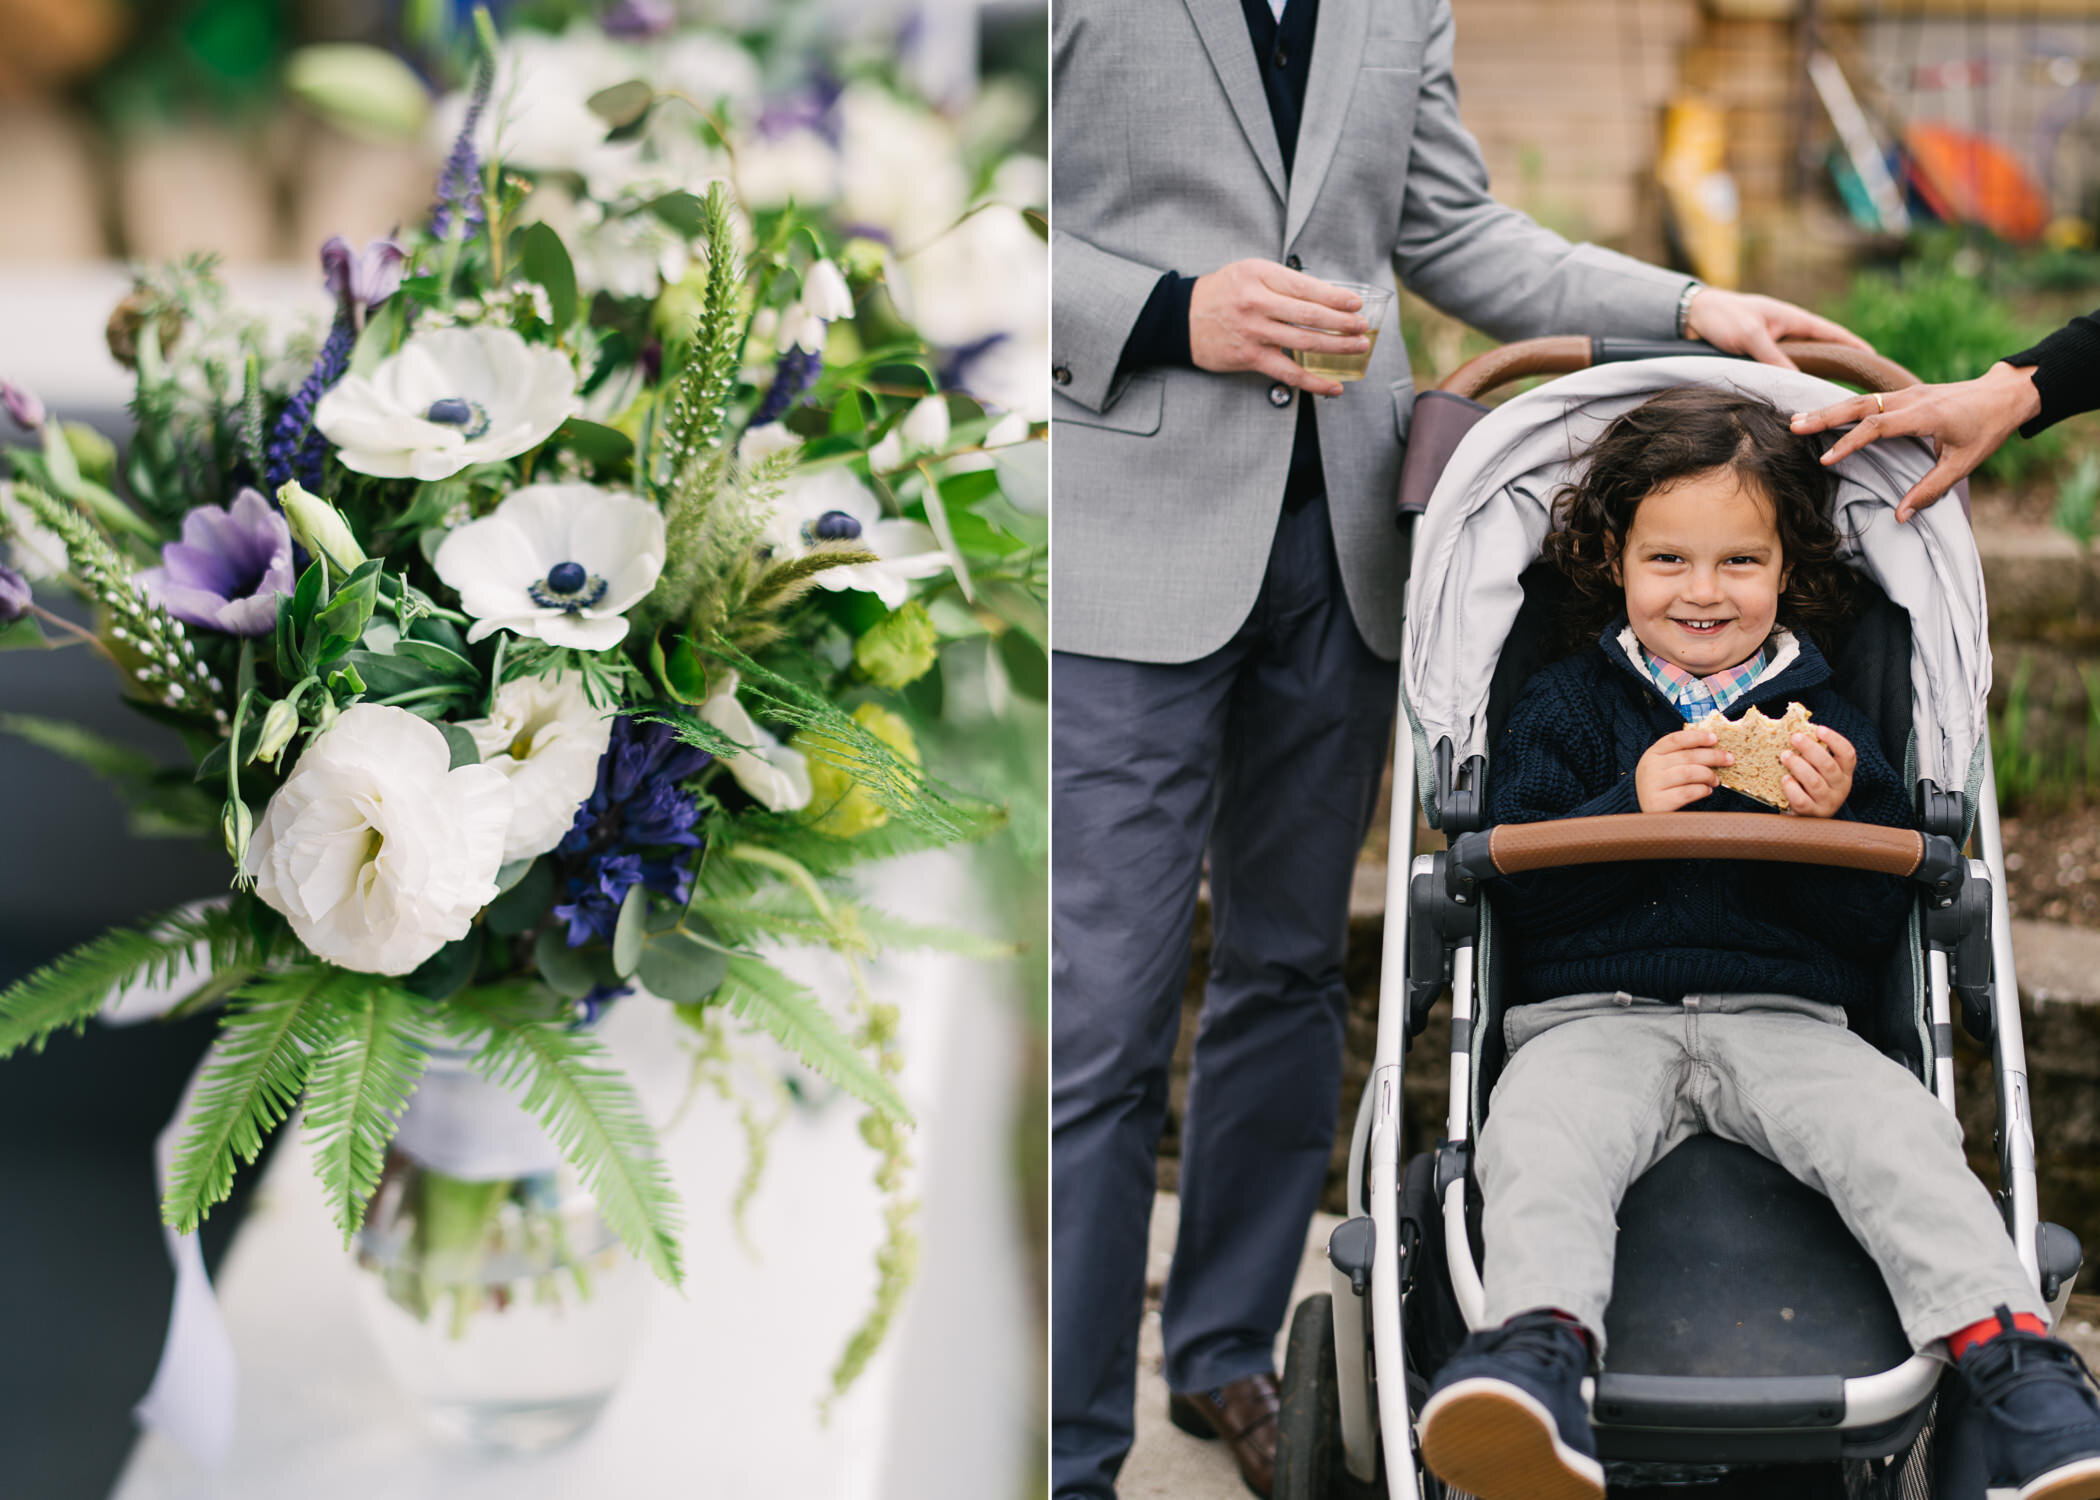  Purple and white bouquet with ferns while young boy smiles with PBJ 